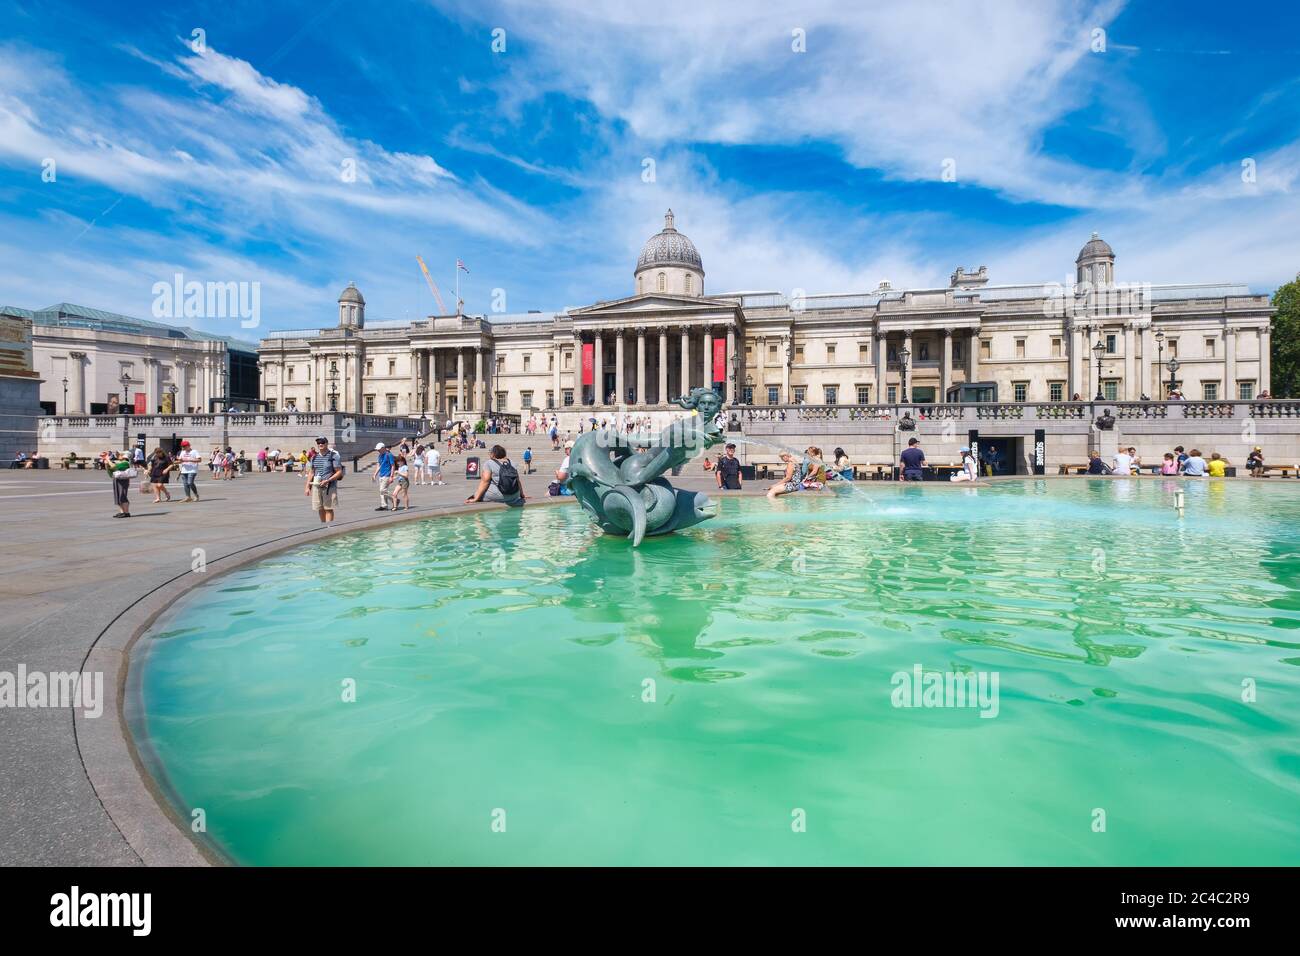 The famous Trafalgar Square and the National Gallery on a beautiful summer day Stock Photo